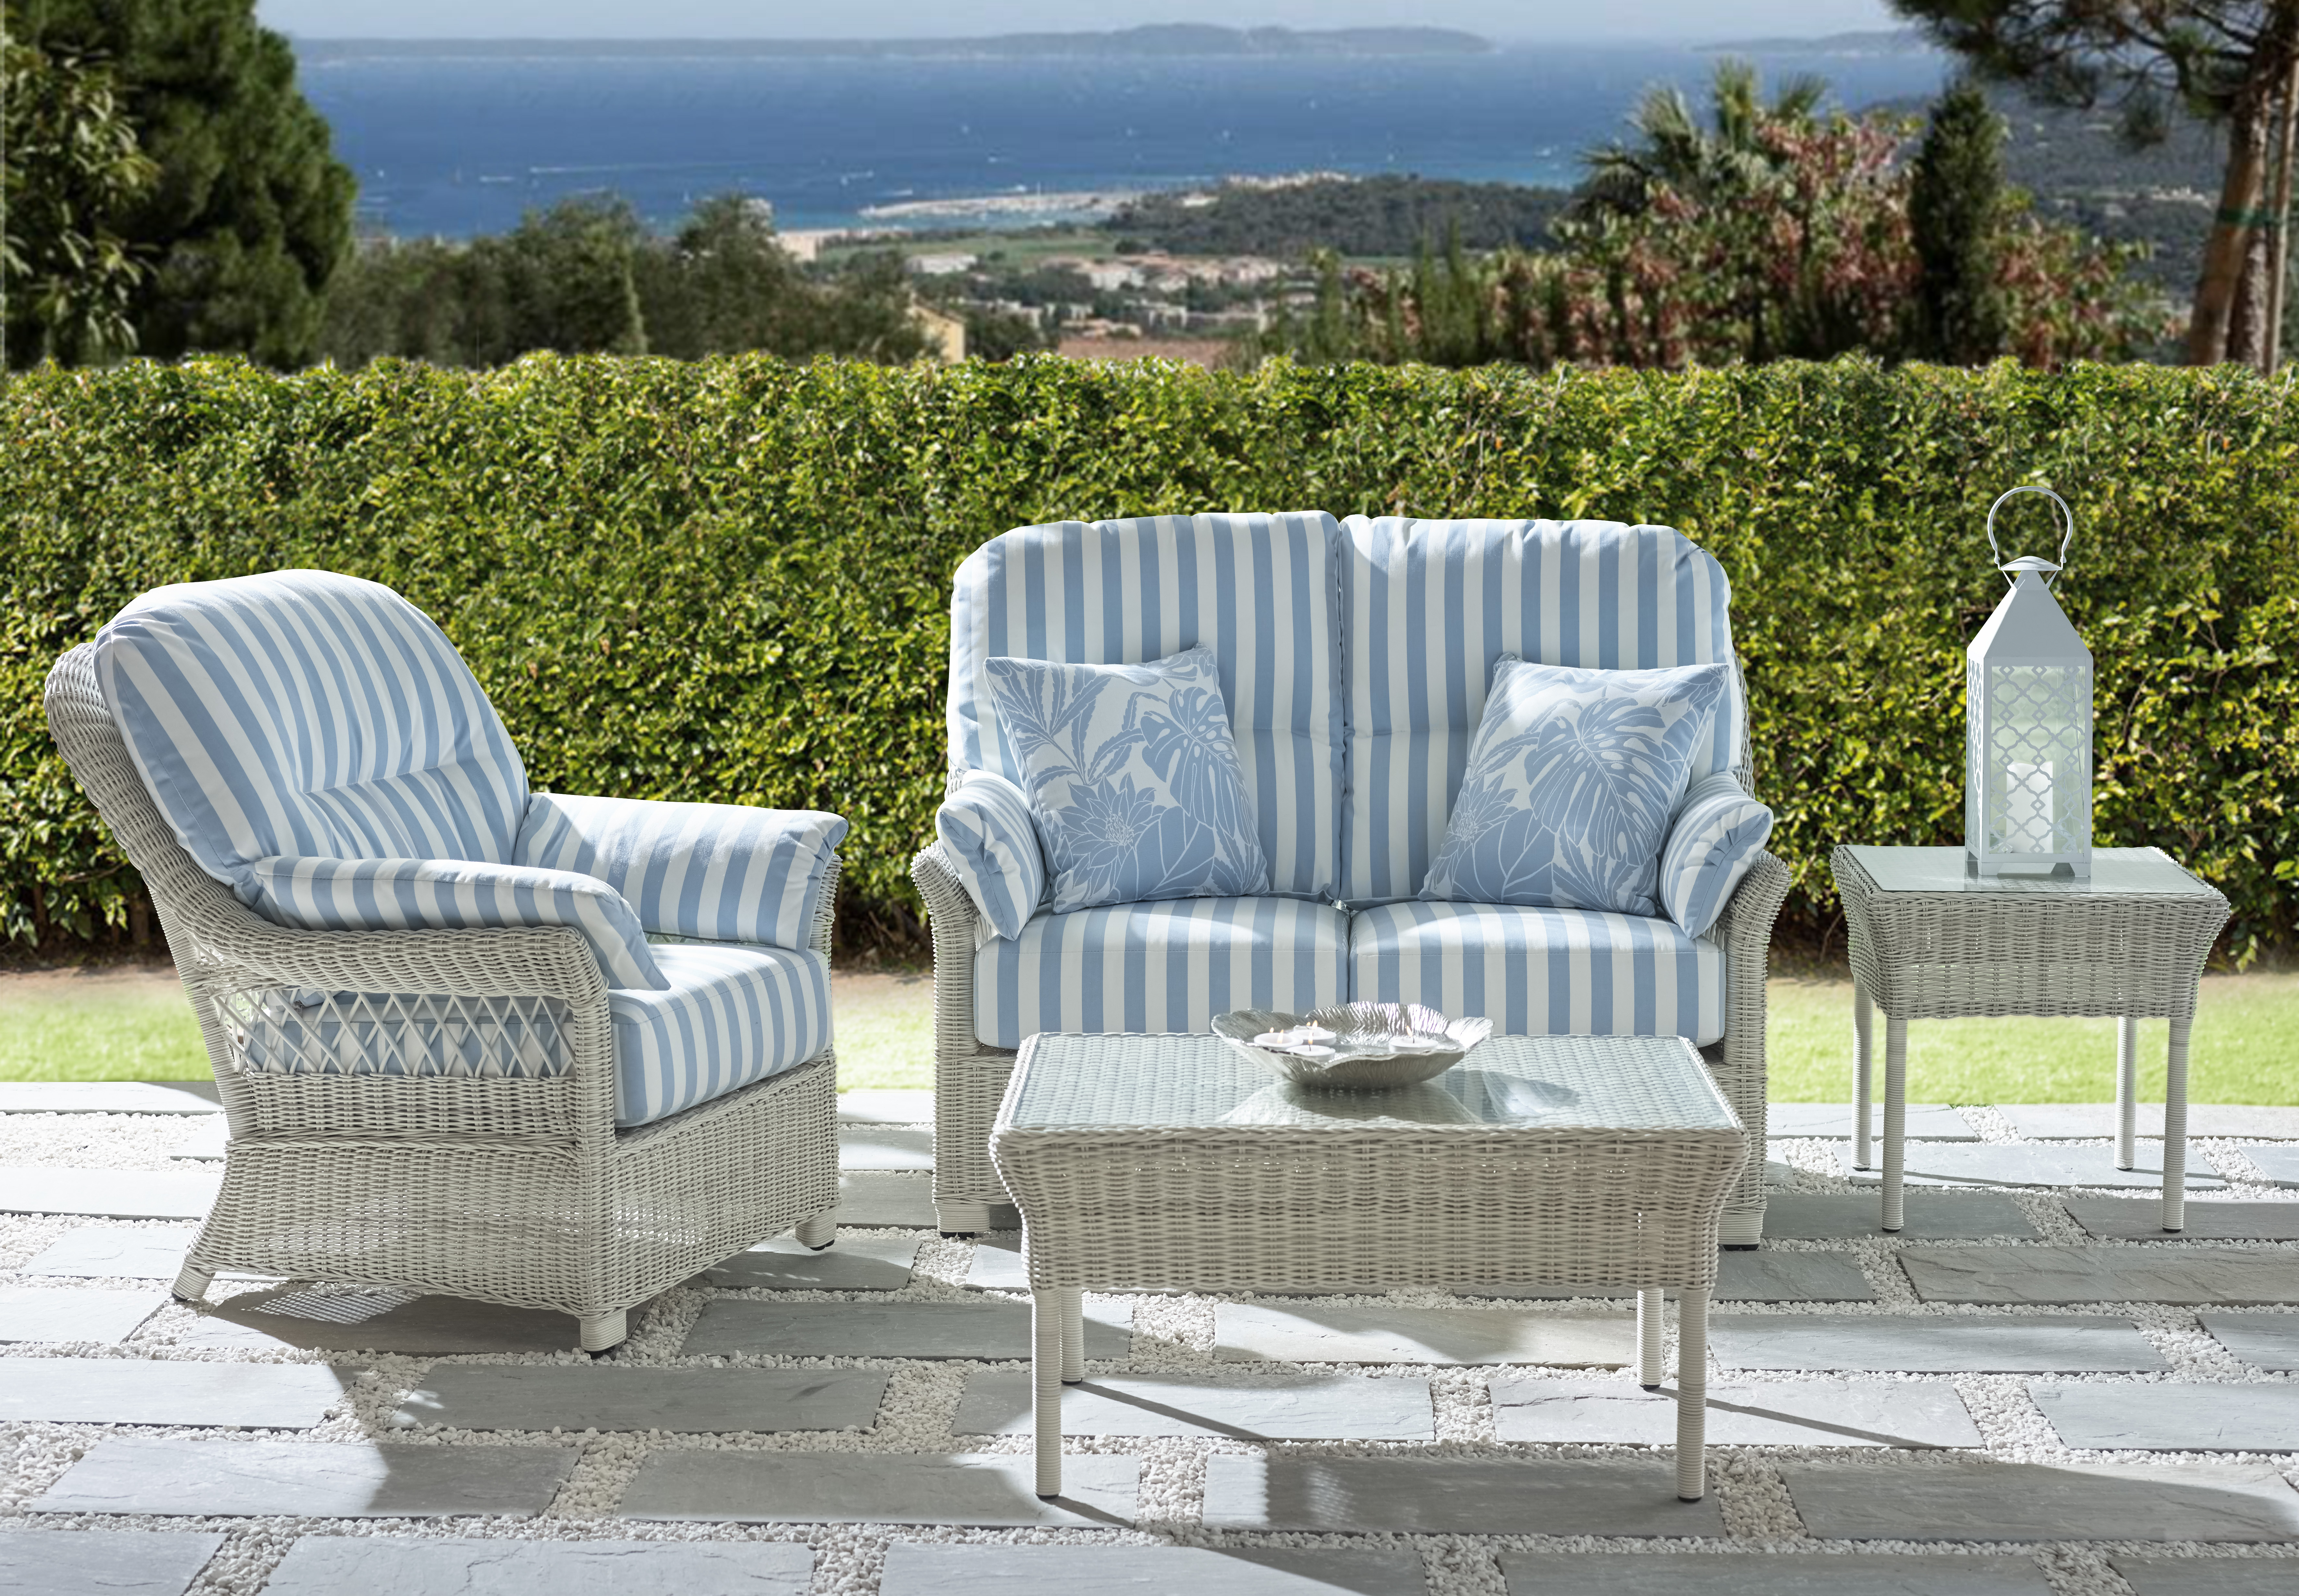 outdoor cane furniture suite with blue striped cushions